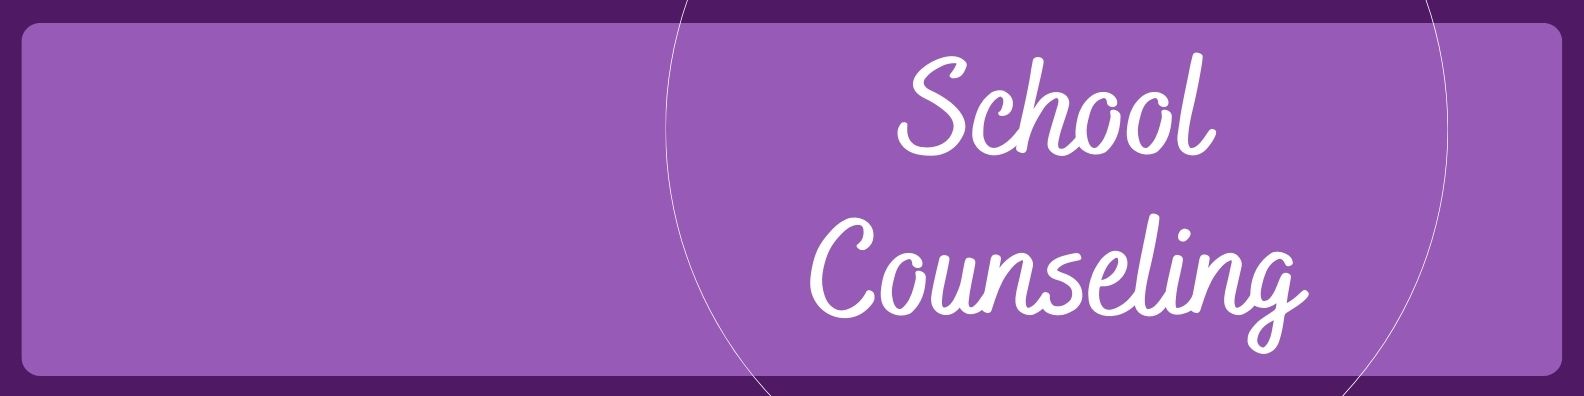 School Counseling Header